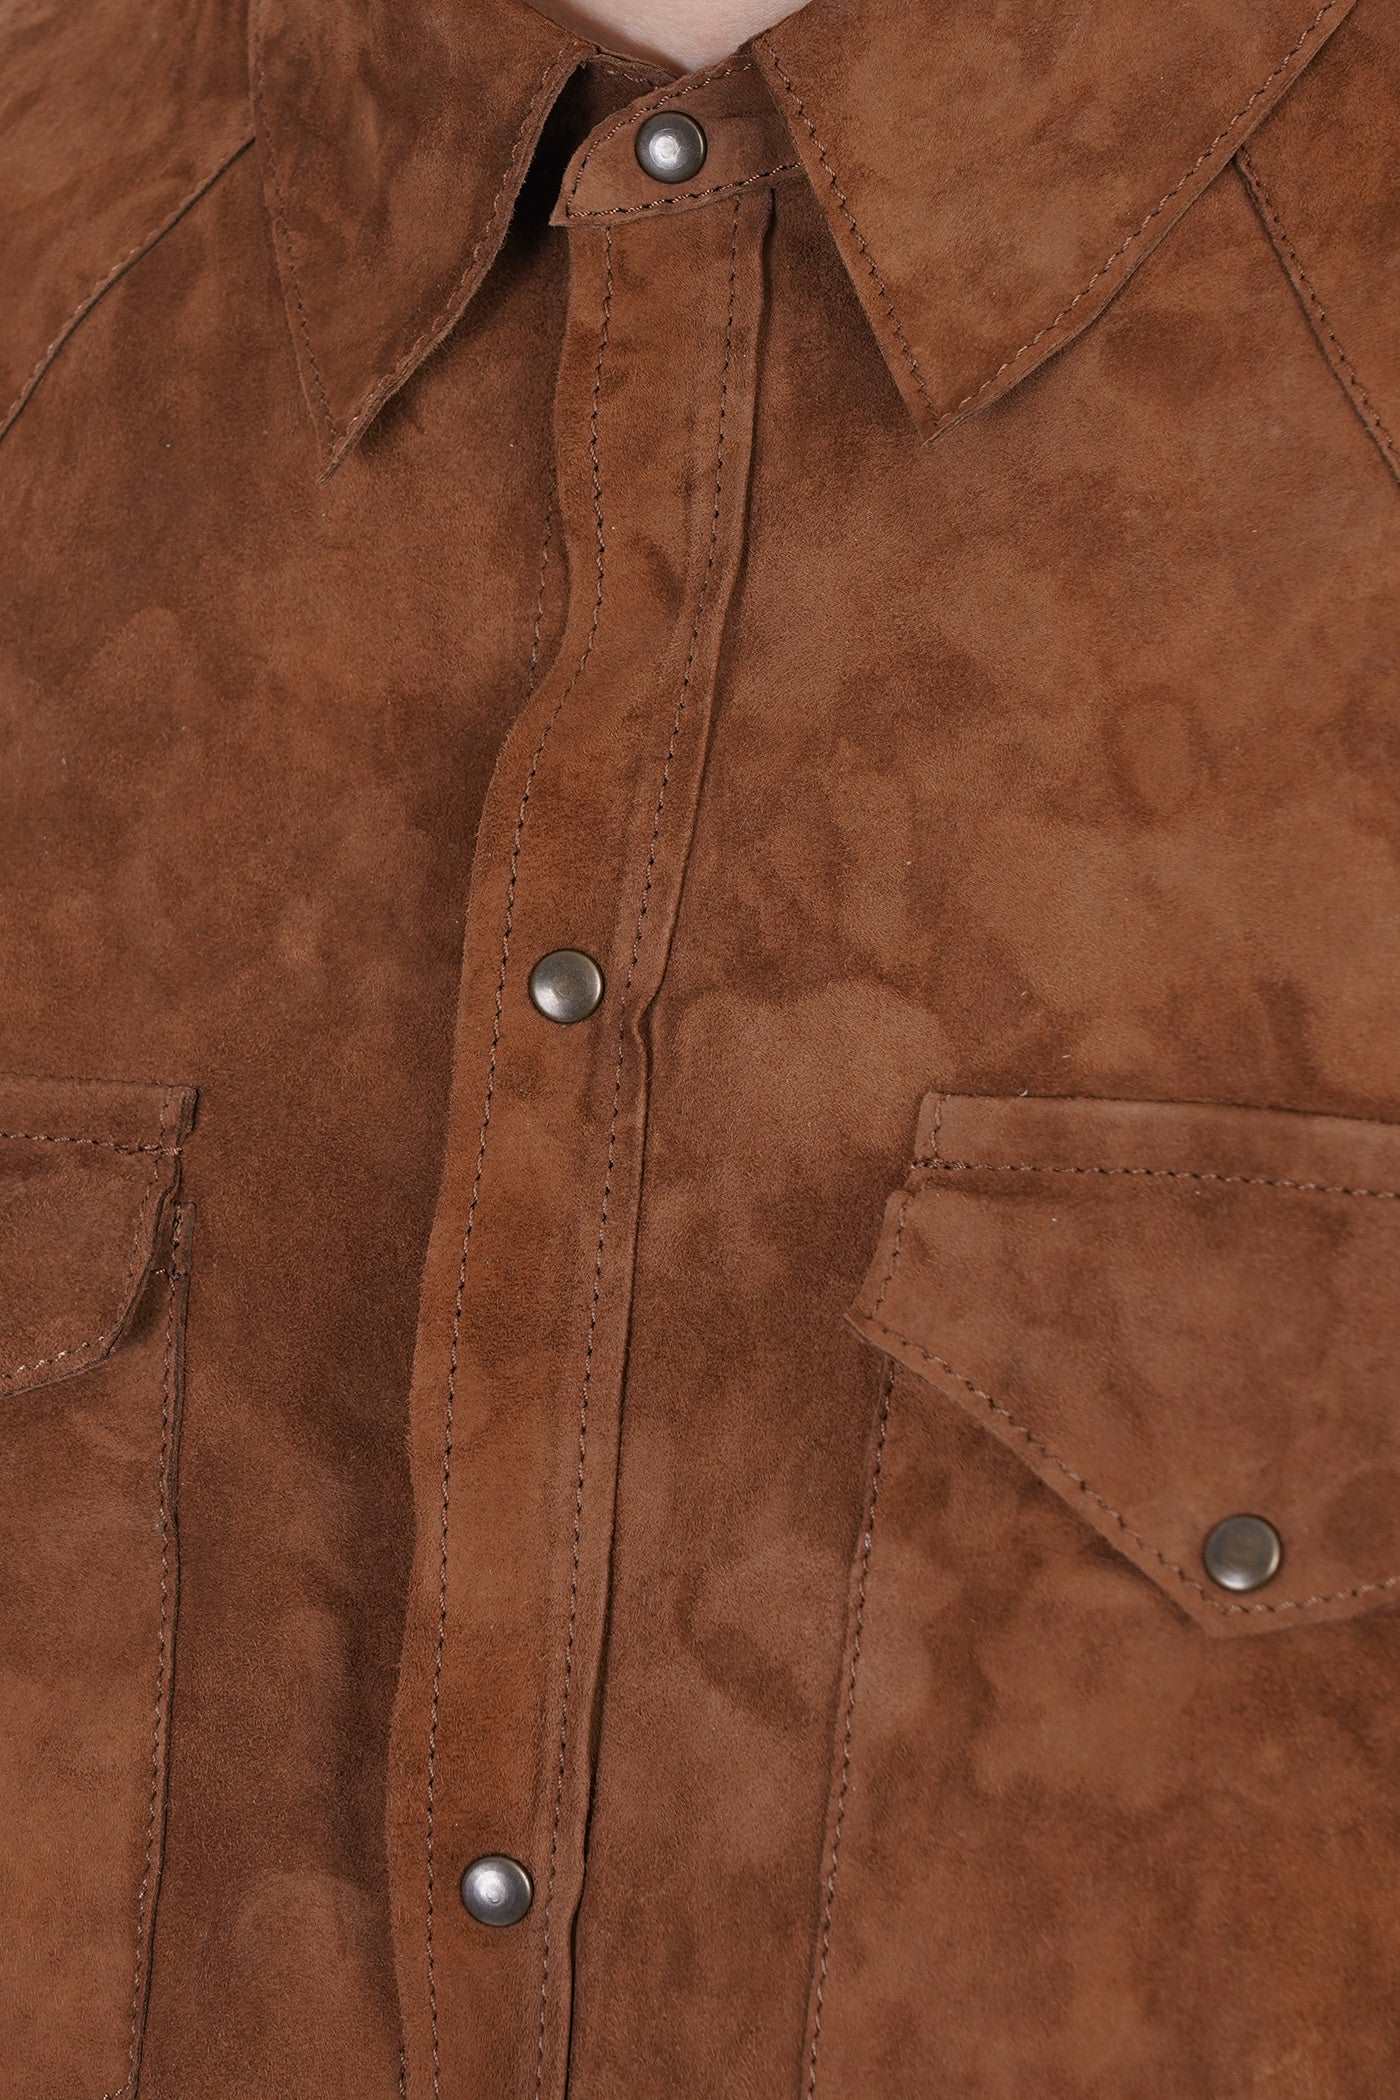 Men's Full Sleeve Suede Leather Shirt In Tan Brown